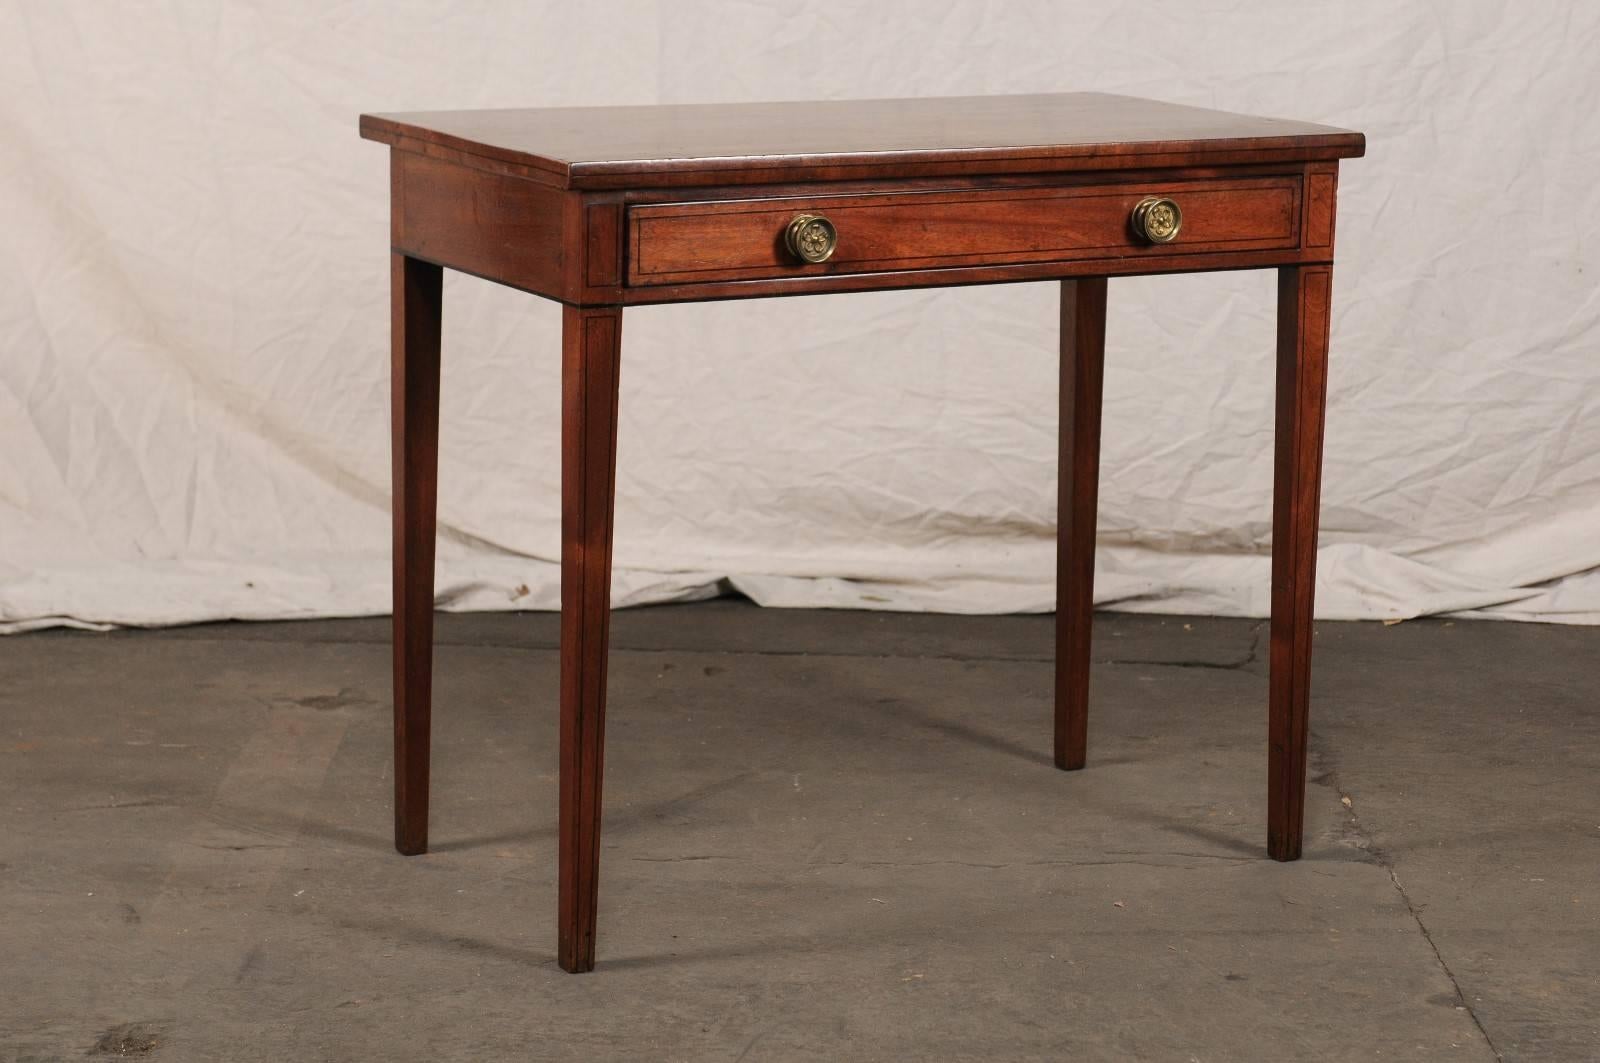 Early 19th Century English Regency Style Mahogany Table with Inlay, One Drawer 2